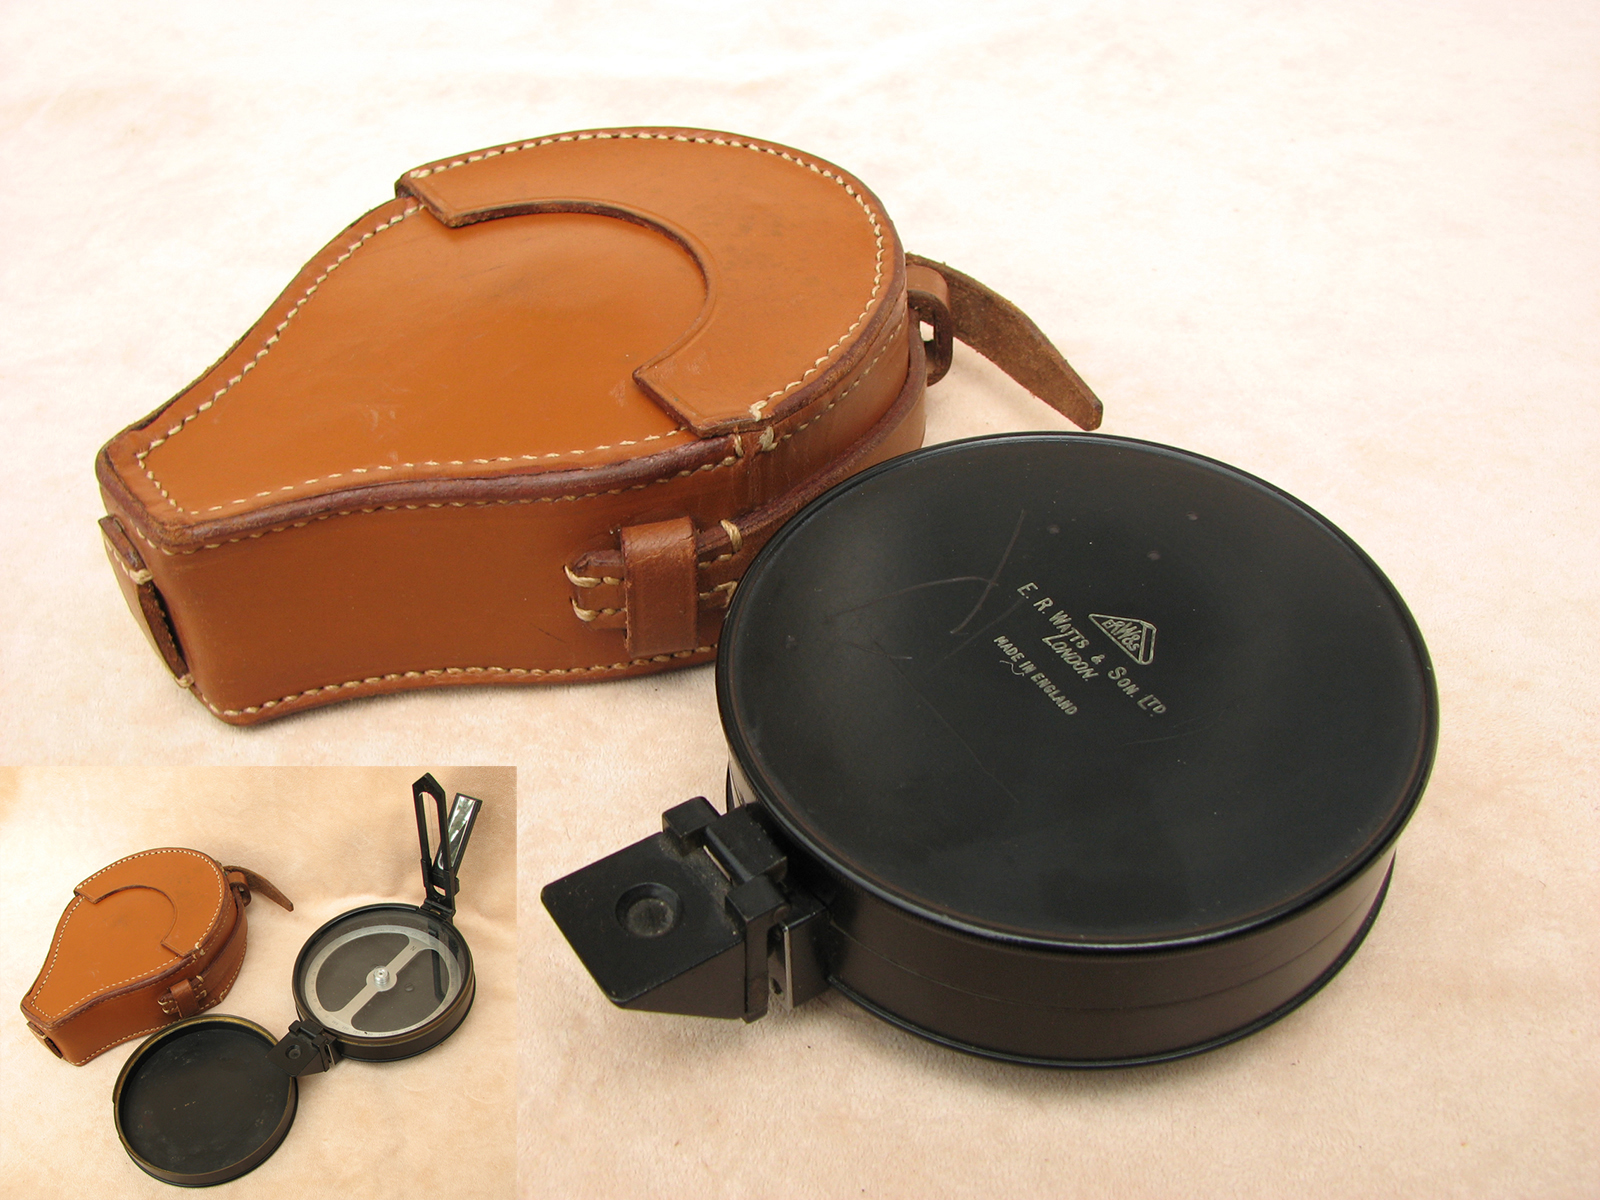 1920's Artillery compass by E.R. Watts & Son Ltd in leather case